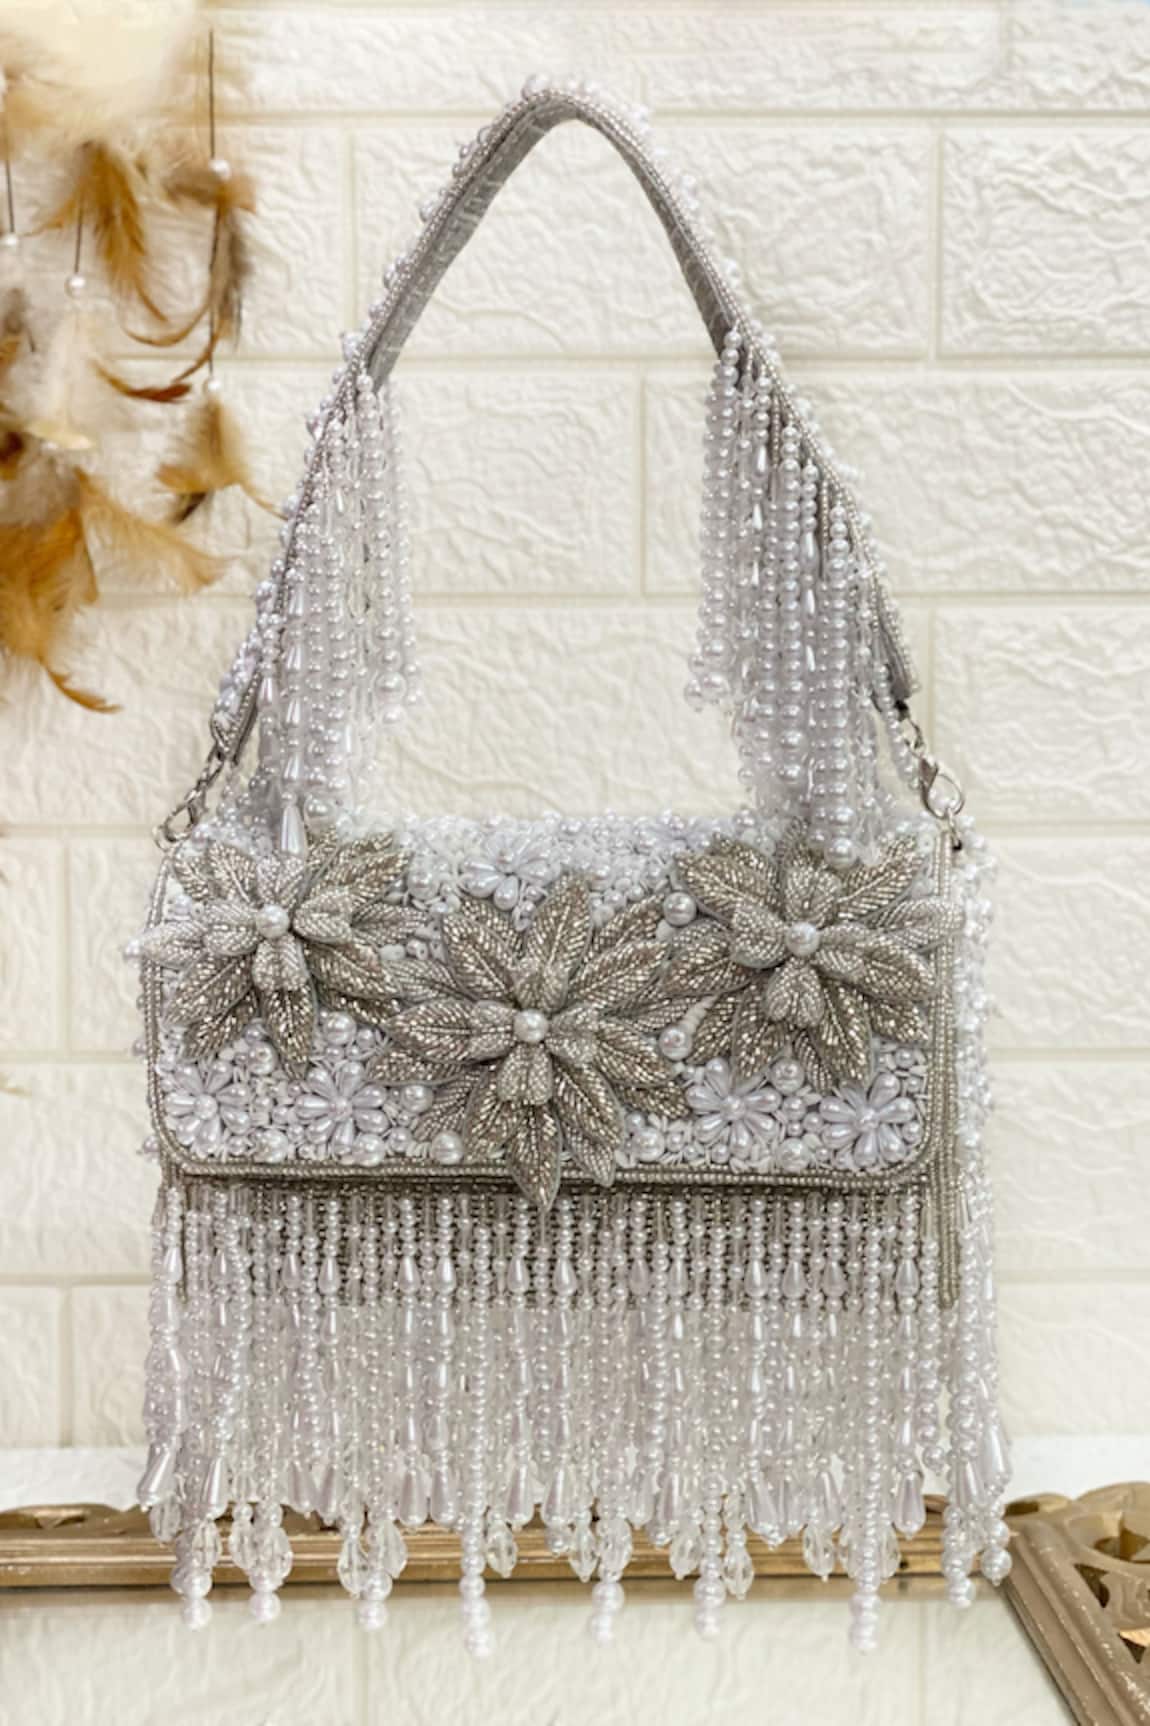 Kainiche by Mehak Sequin Embellished Bag